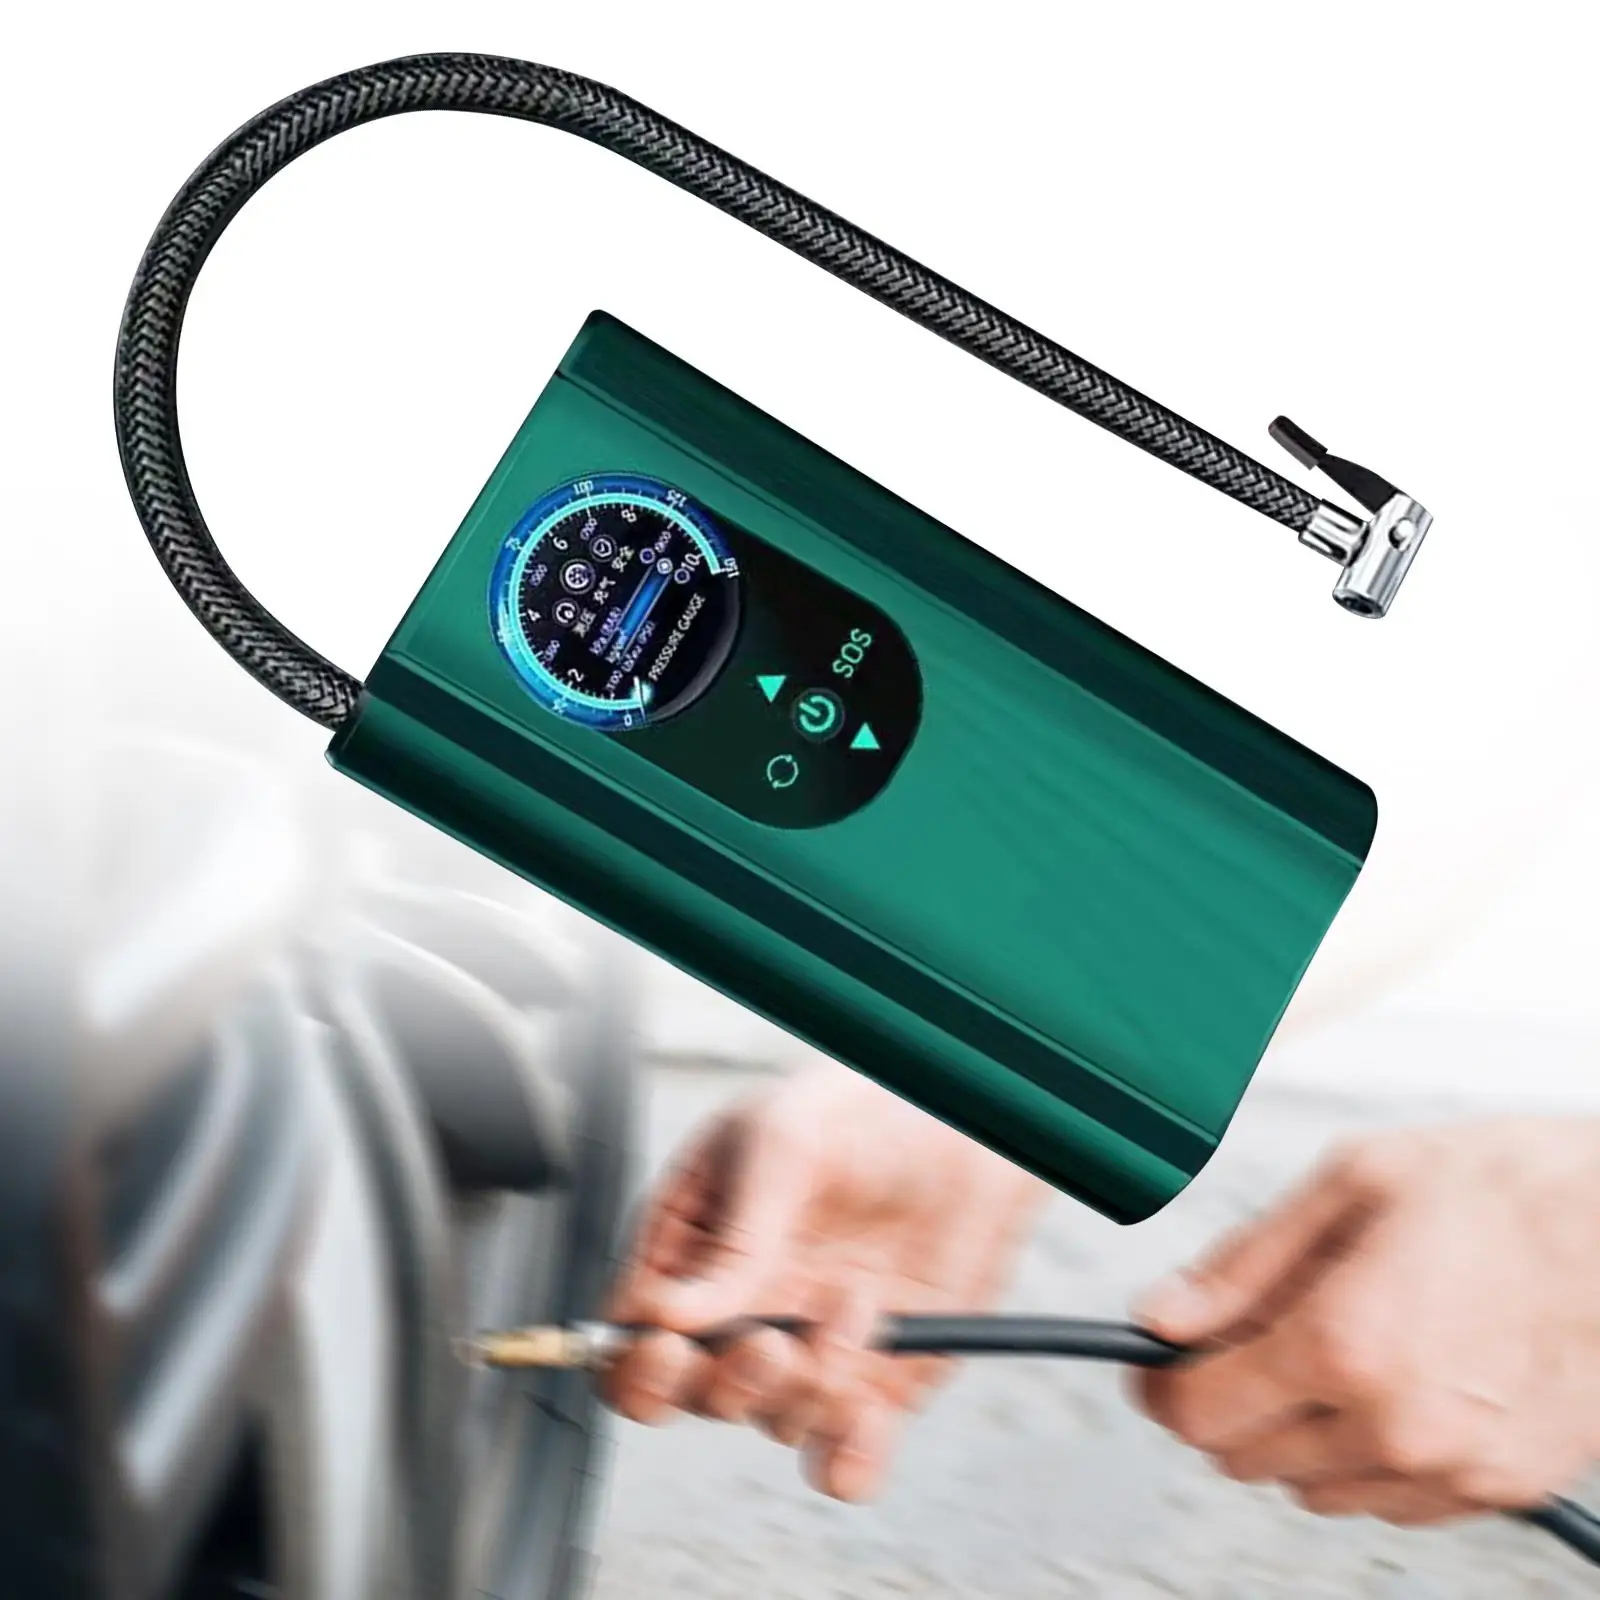 Portable Air Compressor with Tire Pressure Gauge Handheld Multipurpose Tire Inflator for Bicycle Car Ball Basketball Bike